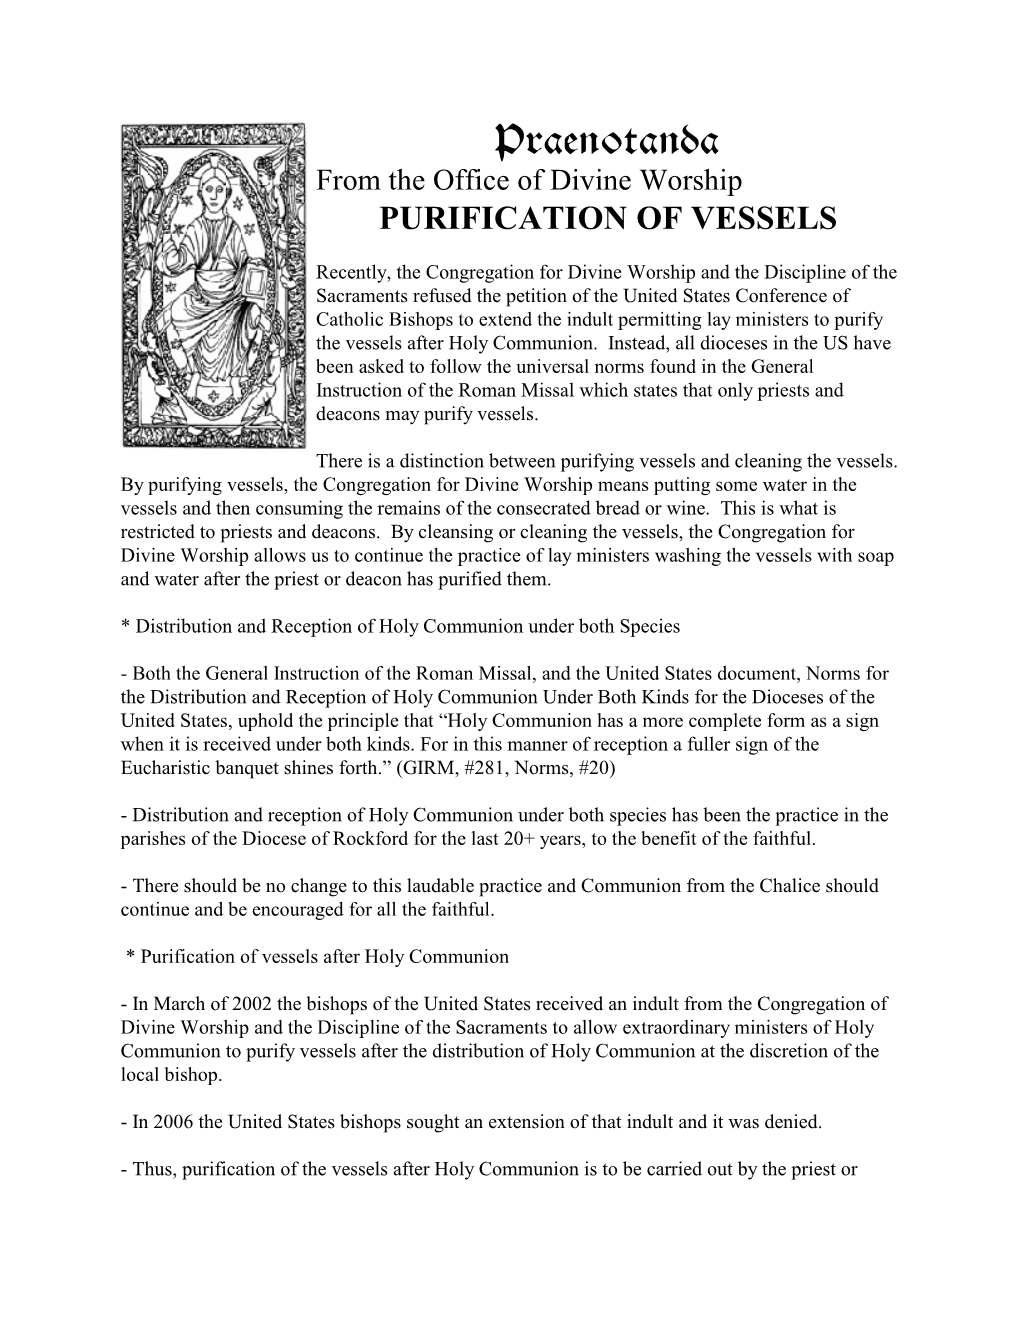 Purification of Vessels